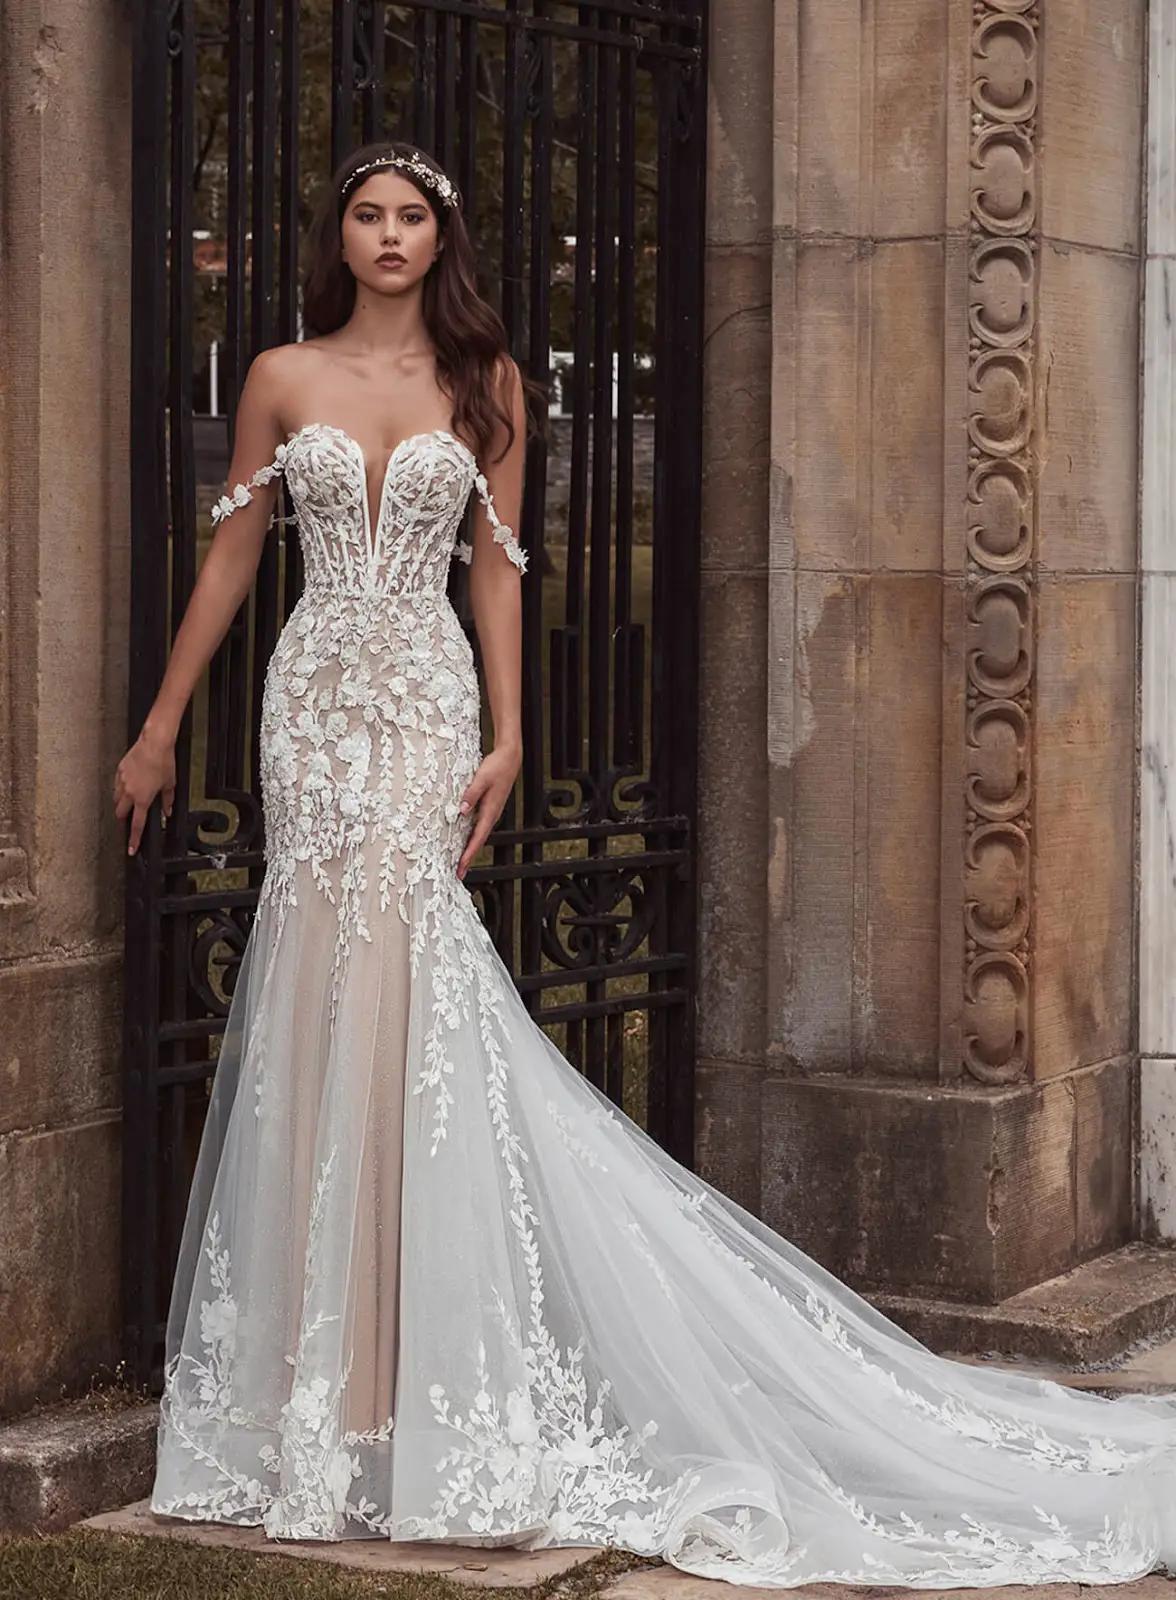 Beautiful Wedding Gowns with Lace and Beading You&#39;ll Fall in Love With Image